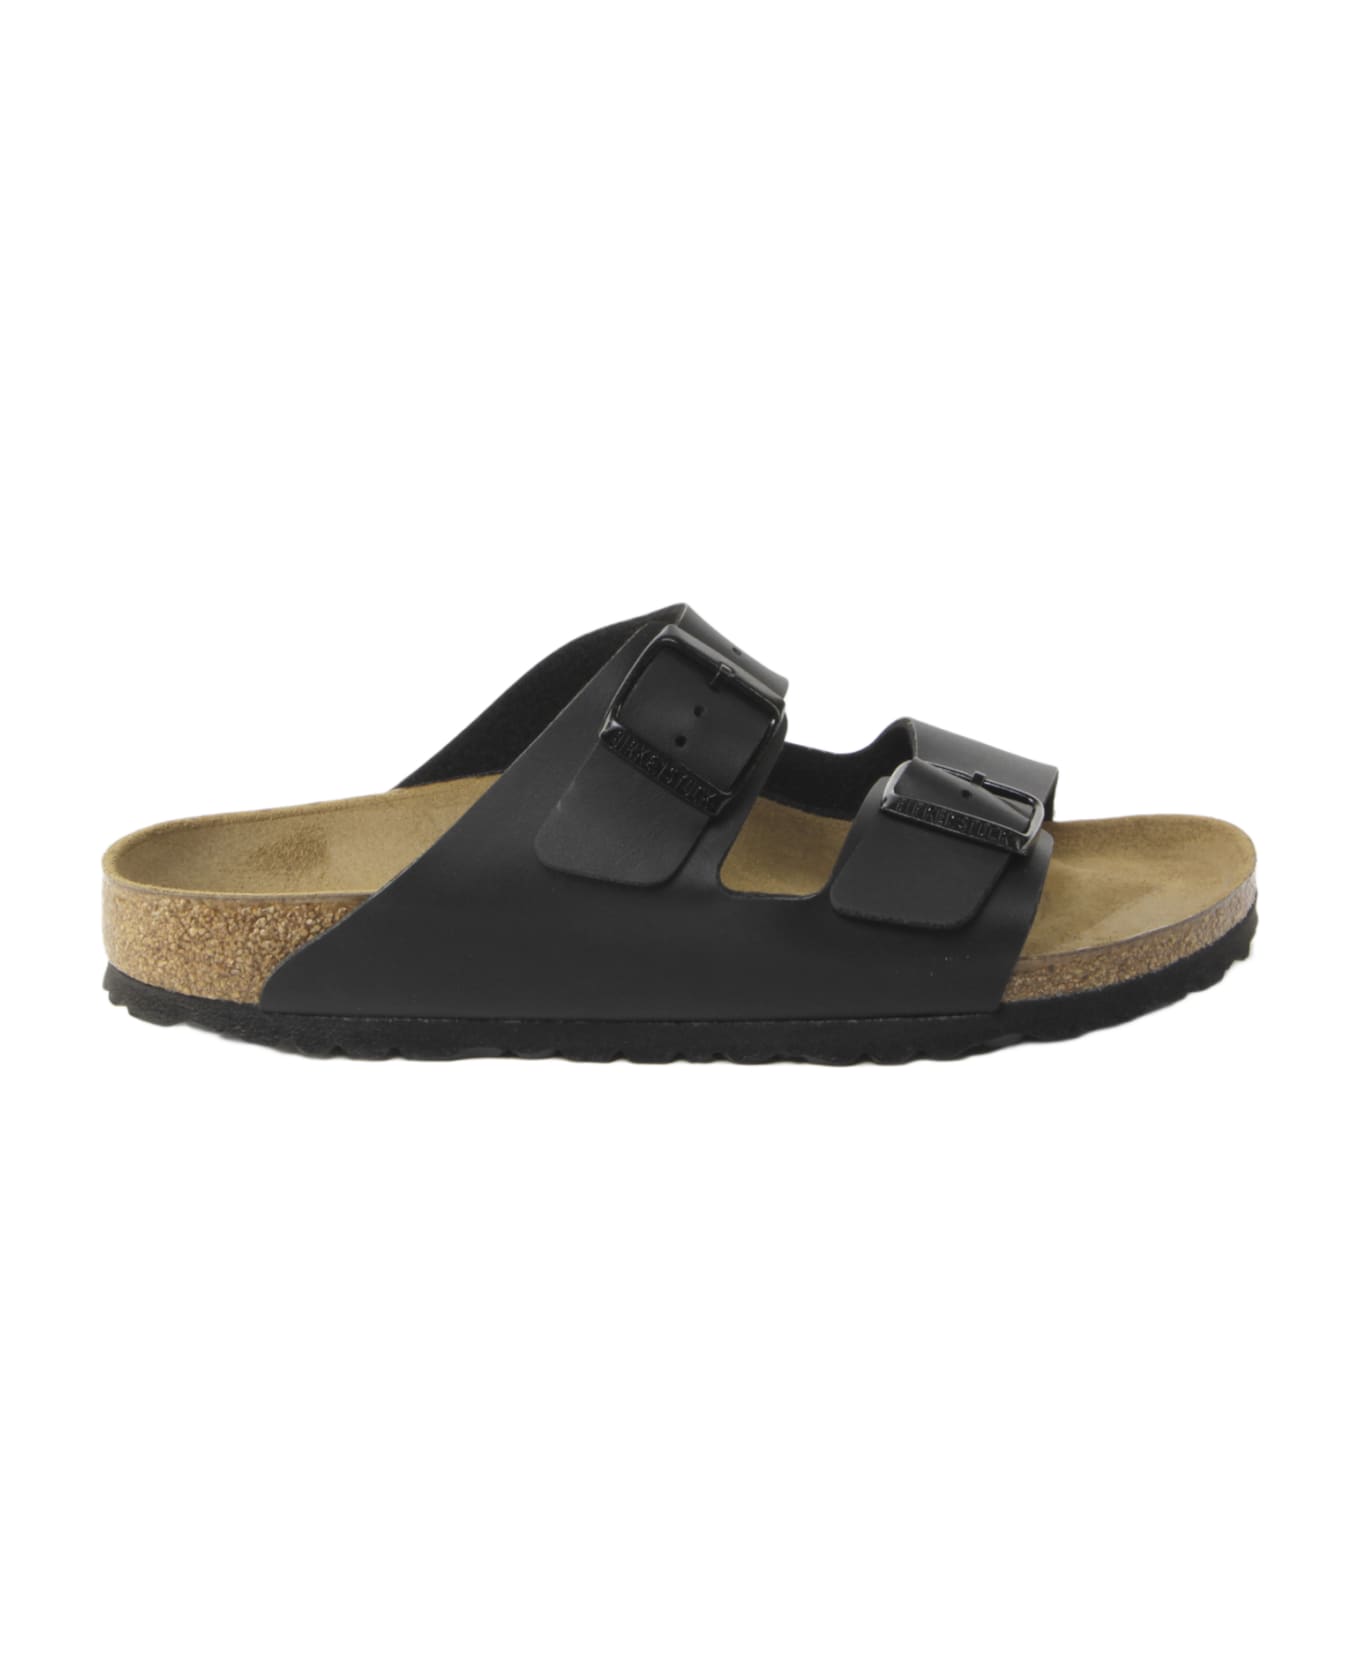 Birkenstock Leather Sandals With Double Strap - Black